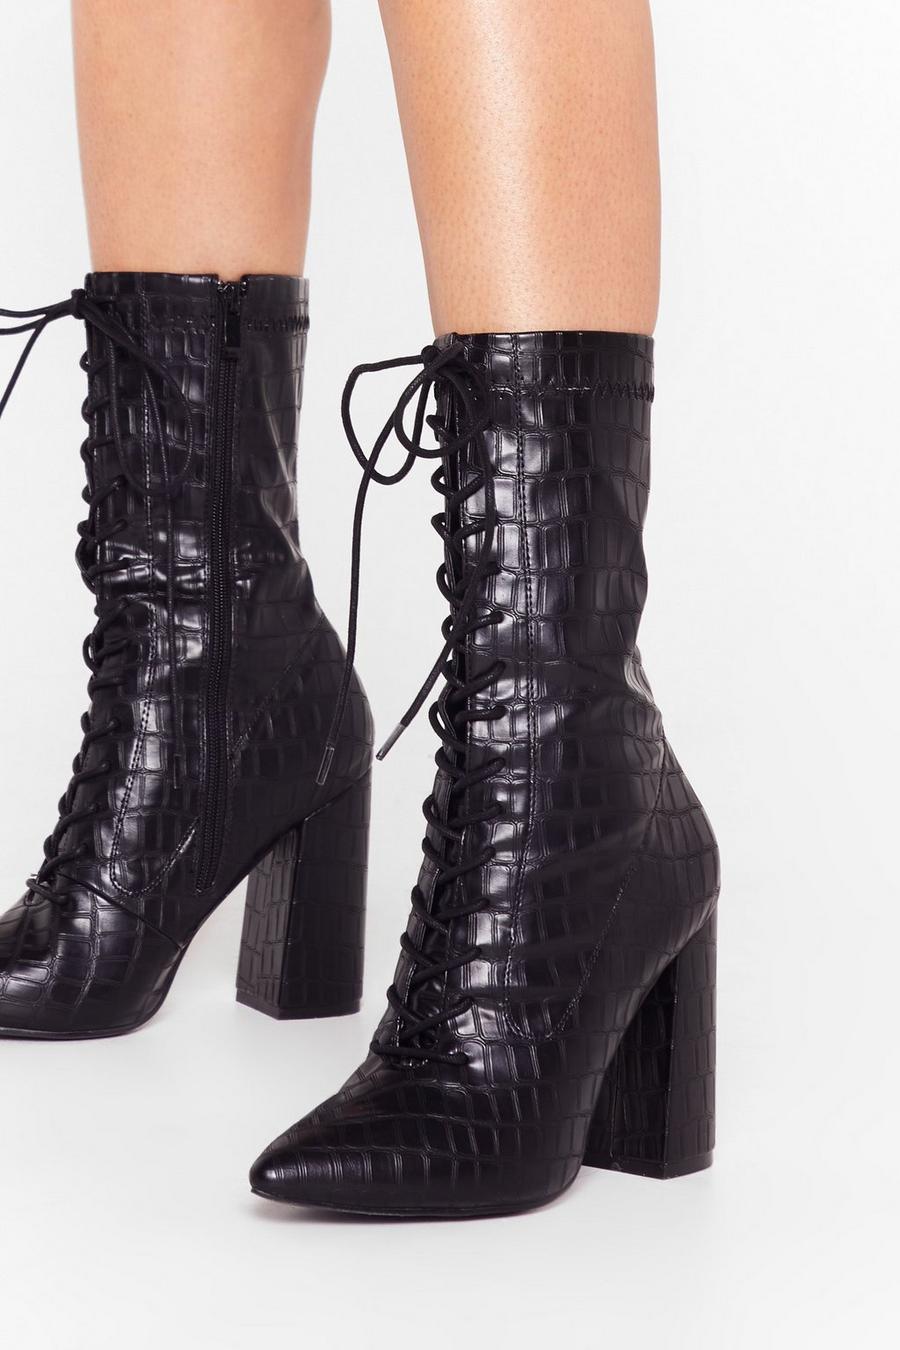 Croc Lace Up High Ankle Boots